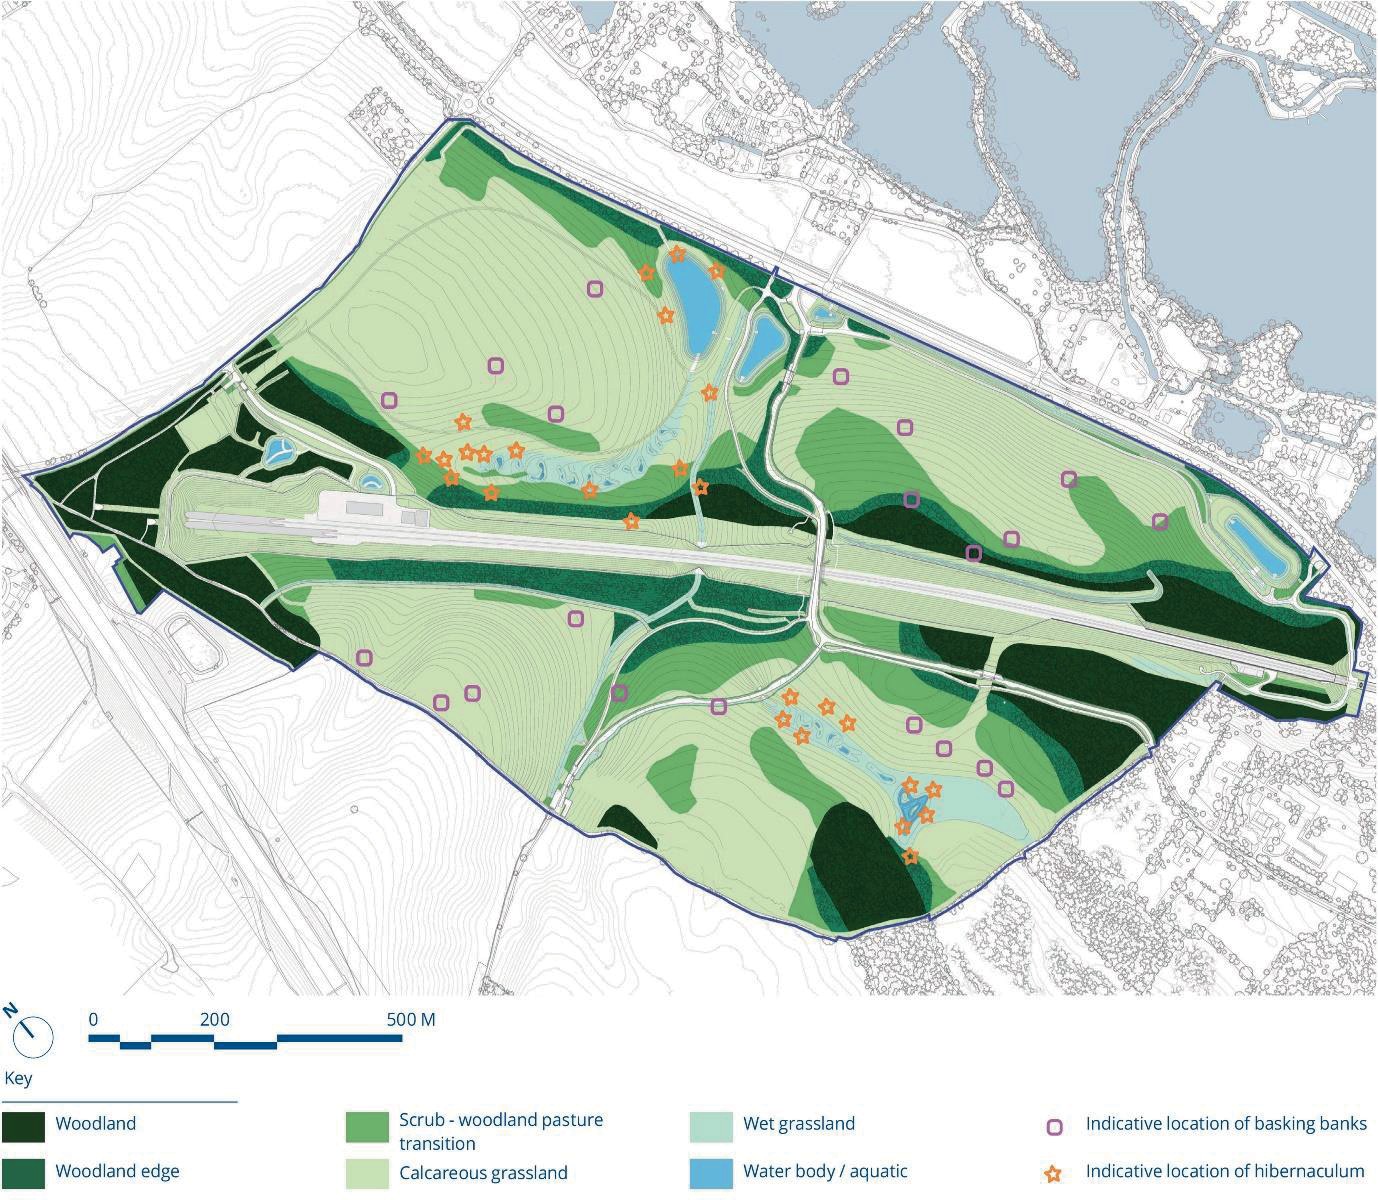 Masterplan showing indicative locations of habitat features